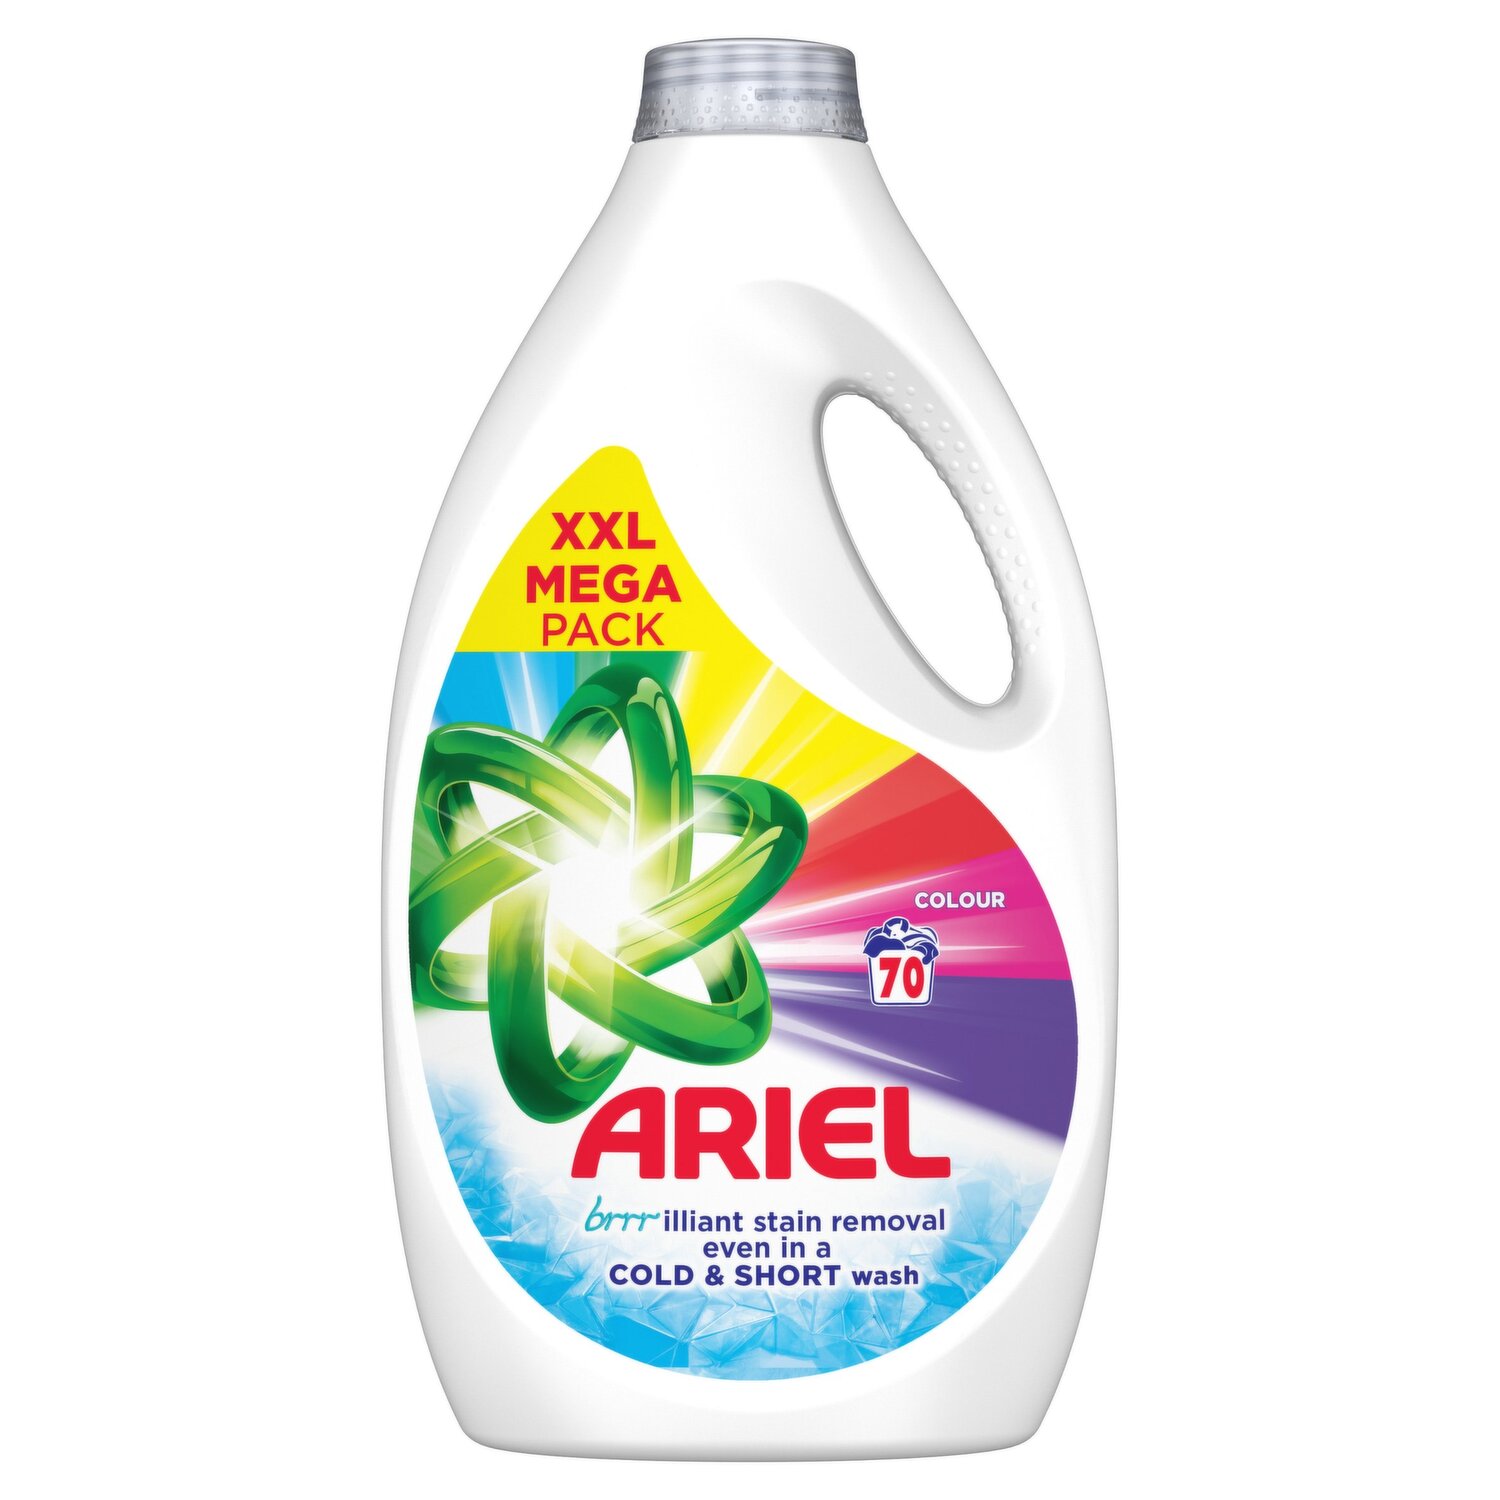 Ariel Laundry Santiser Ultra Concentrated with Lenor - 25 Washes